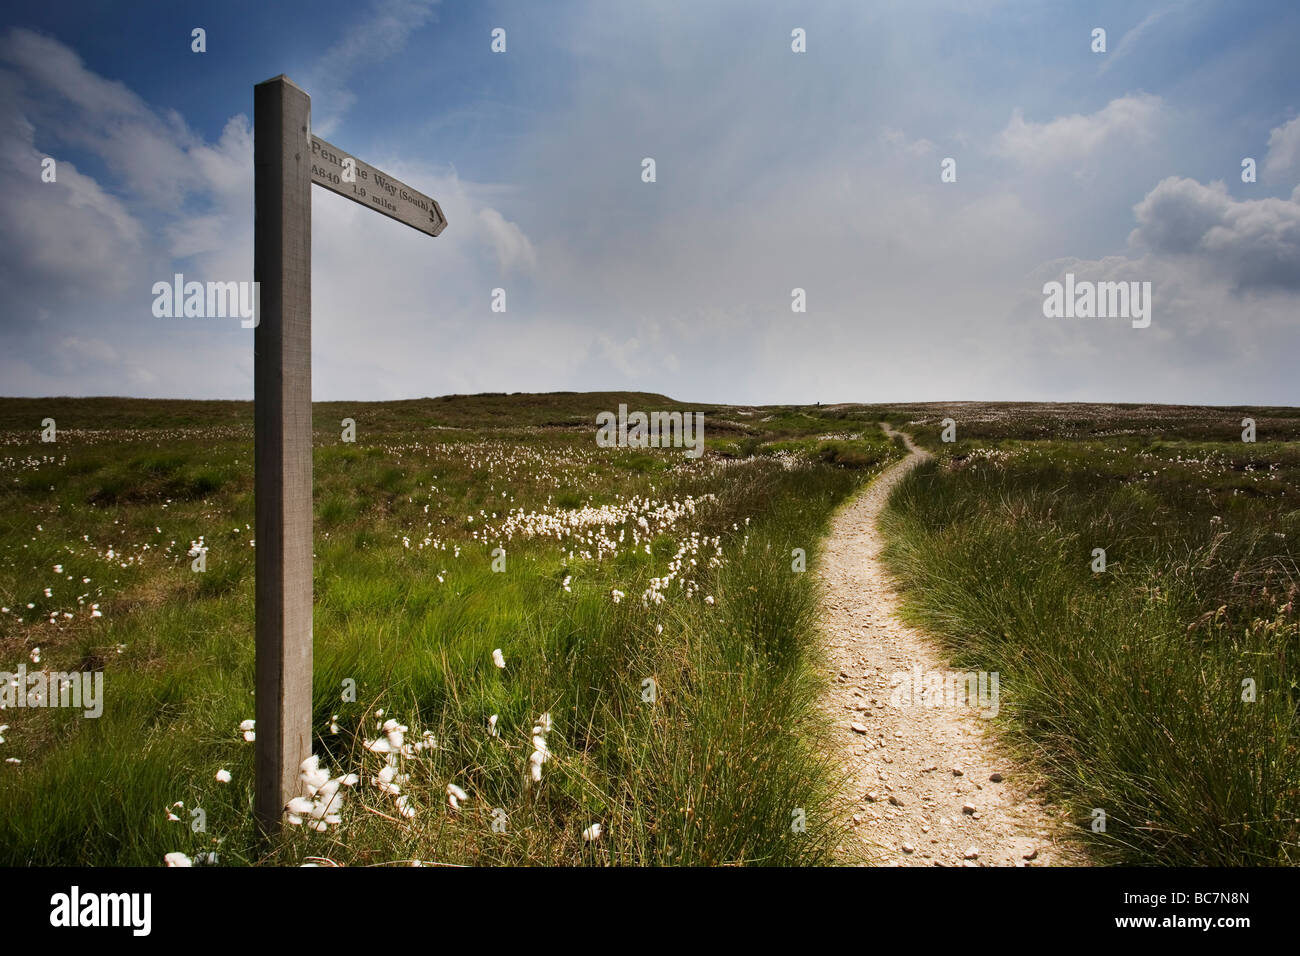 The Pennine Way footpath and signpost at Saddleworth Moor. The signpost reads 'pennine way south 1.6 miles' Stock Photo